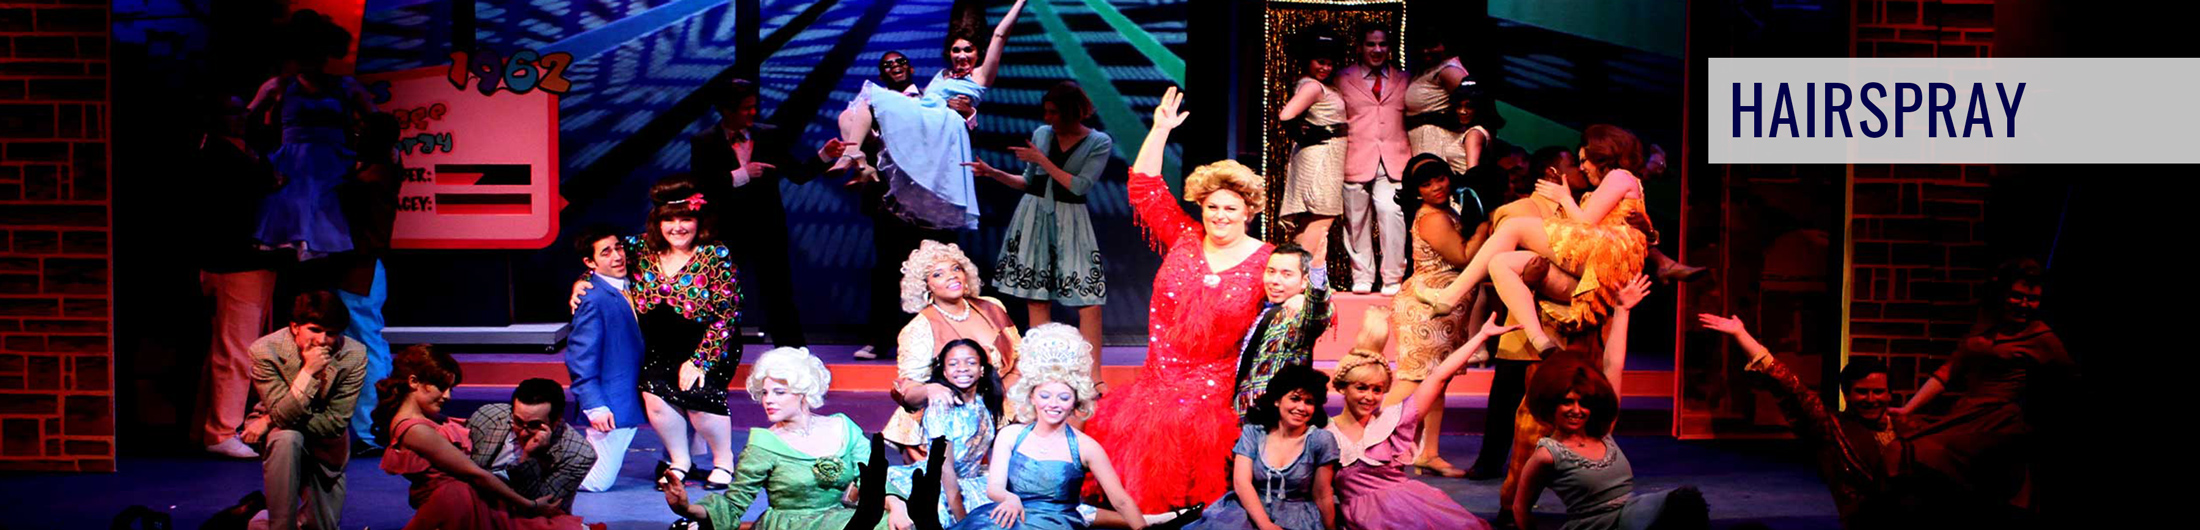 Image of Students on stage performing Hairspray